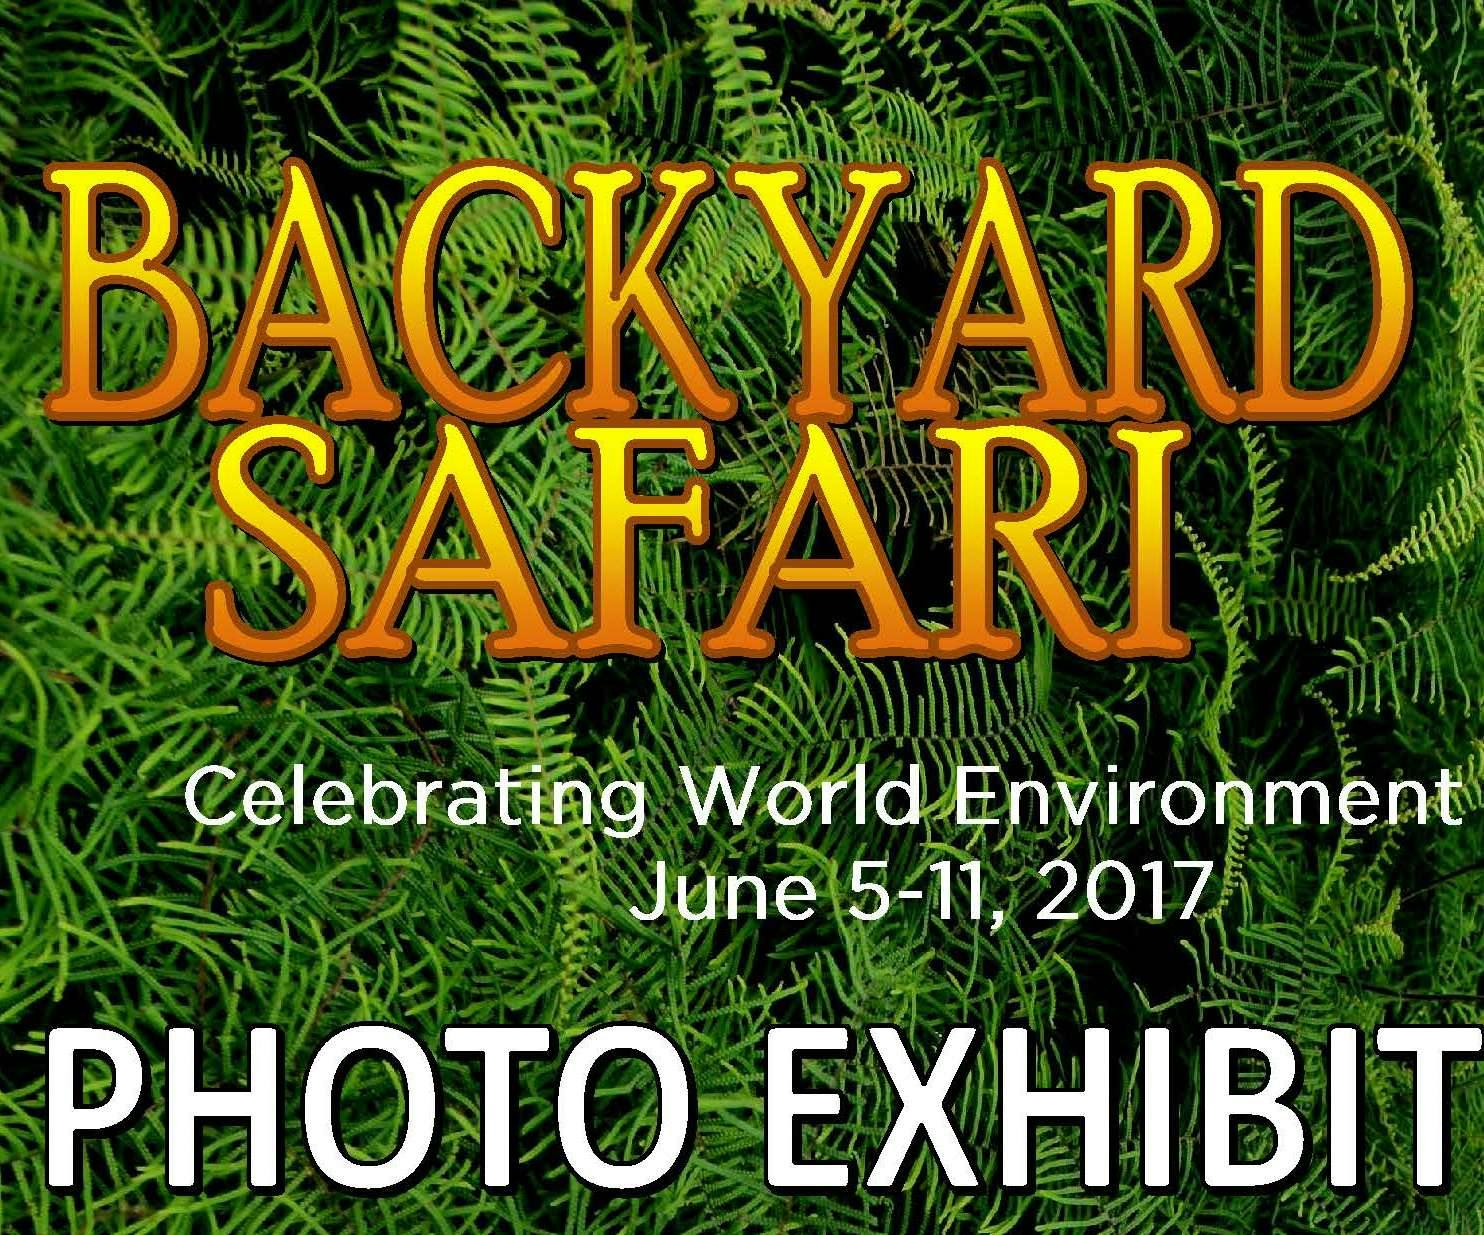 Photo exhibition during World Environment Week 2017